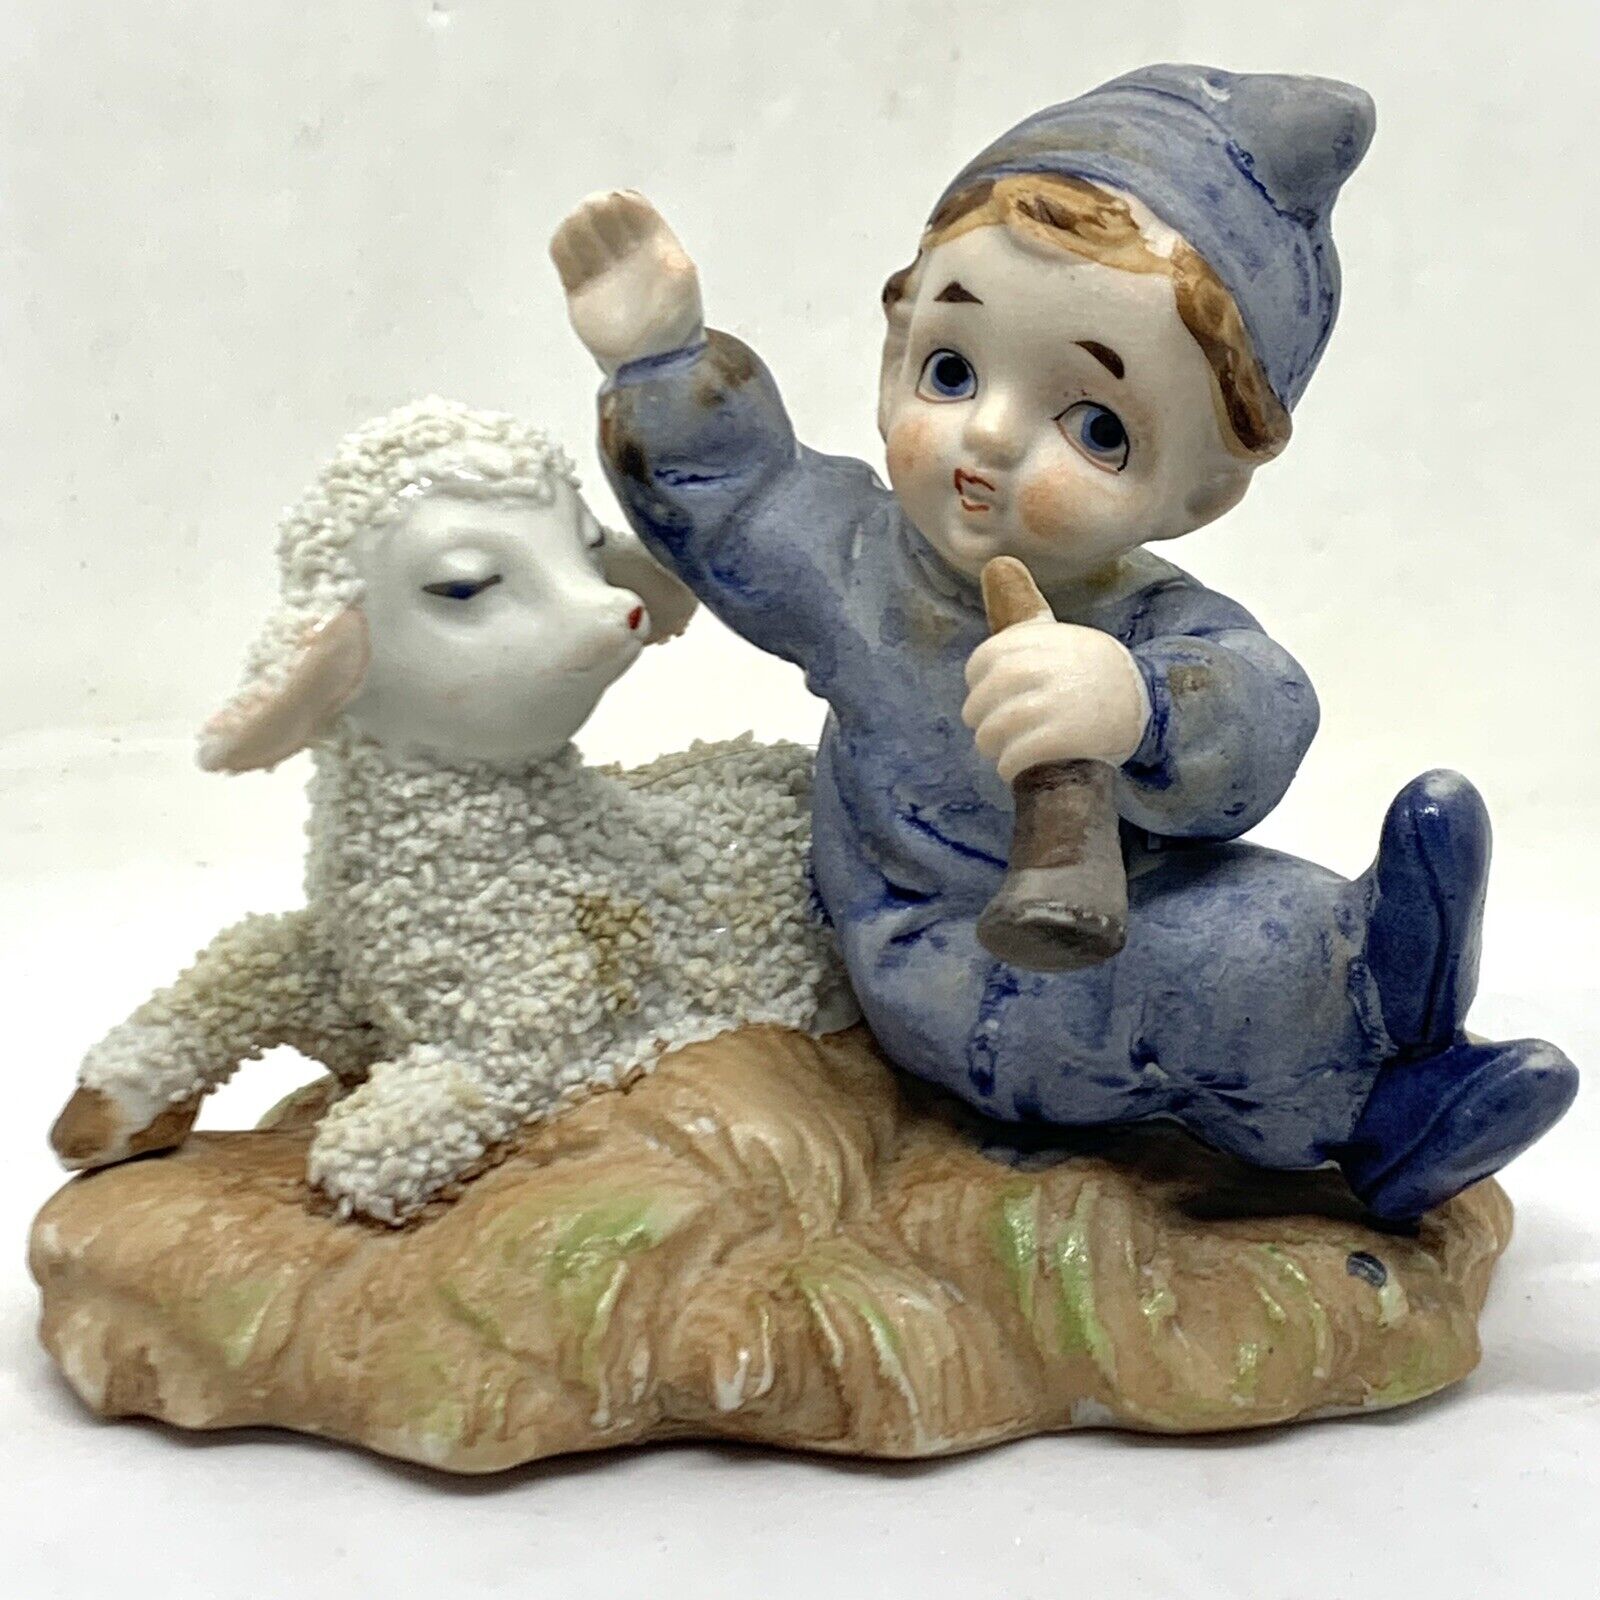 Little Boy Blue With Horn & Sugared Sheep Lamb Vintage Figurine Whimsical Japan